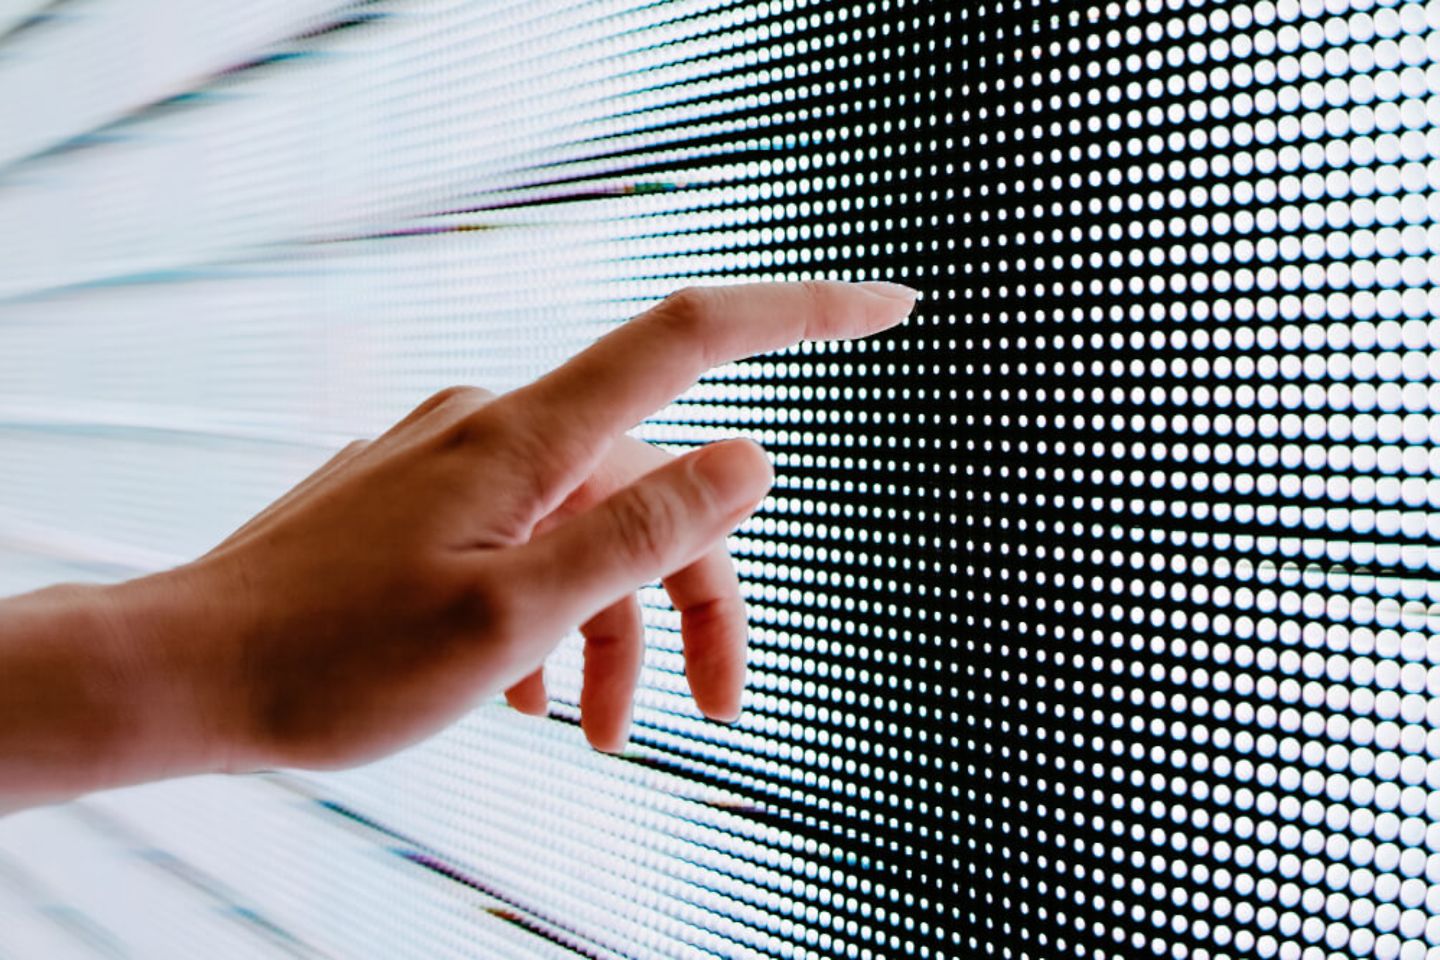 Hand touches digital screen with dots